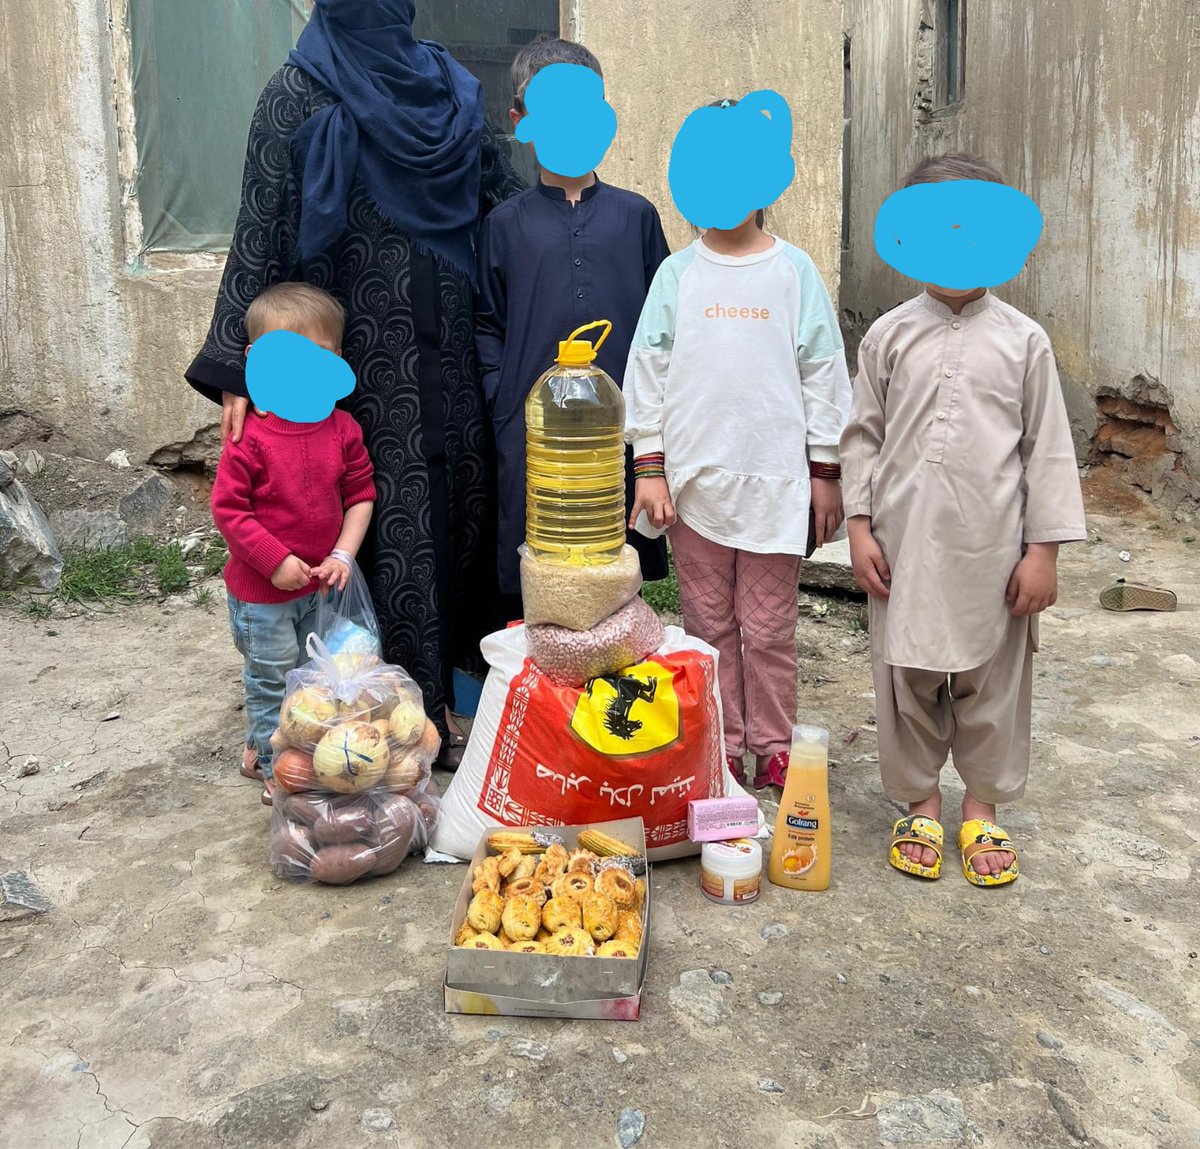 Once again our first supporter Srinivas @s_shanumkha jumped on the opportunity to help a mom and her children on this Mother's day with a food package, gifts for her and cookies for her children. Thanks so much for your kindness. To help PayPal: Rafi.Sadiq@Hotmail.com 60 dollars